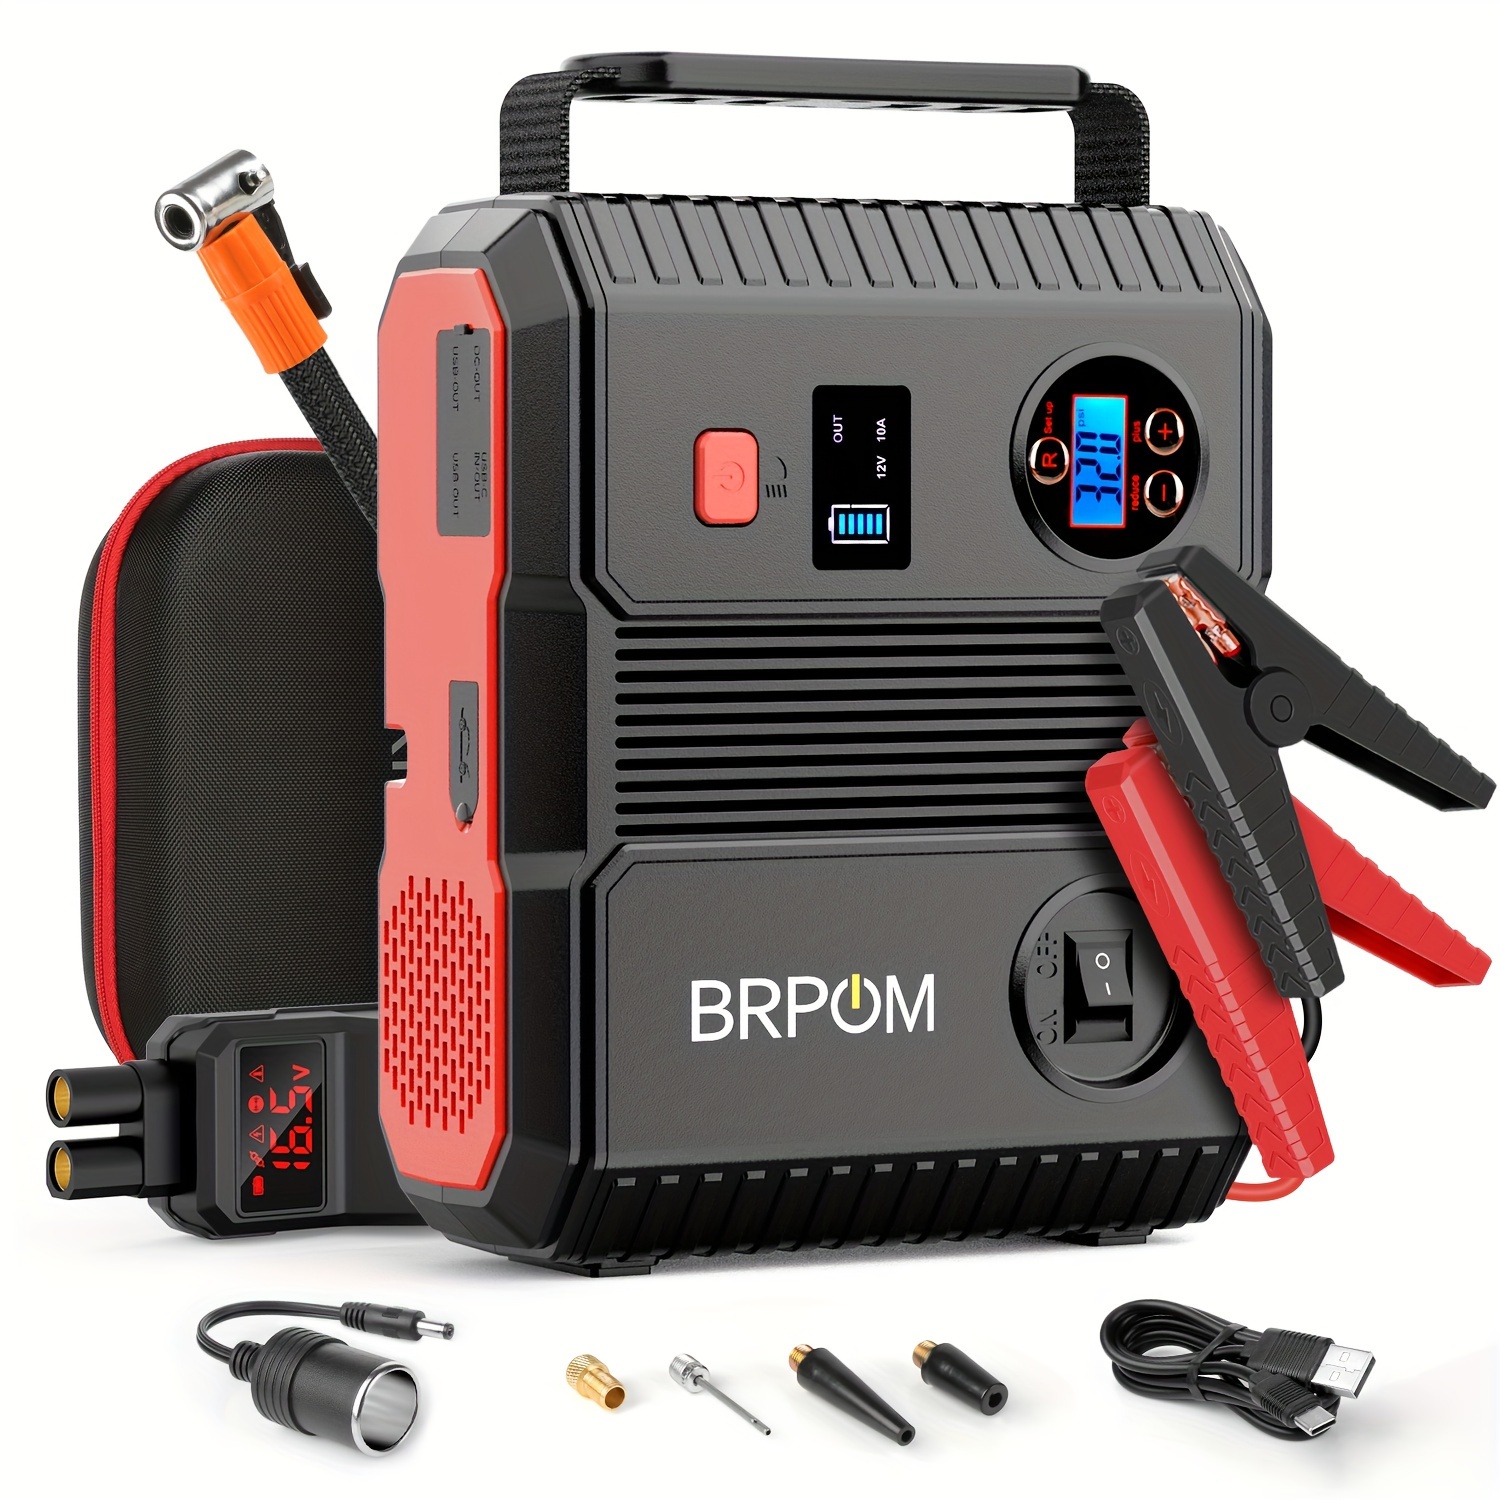 Car Jump Starter Air Compressor 150psi 4000a Peak Gas 8 0l Engine 50 Times 12v  Battery Qc 3 0 160w, 90 Days Buyer Protection